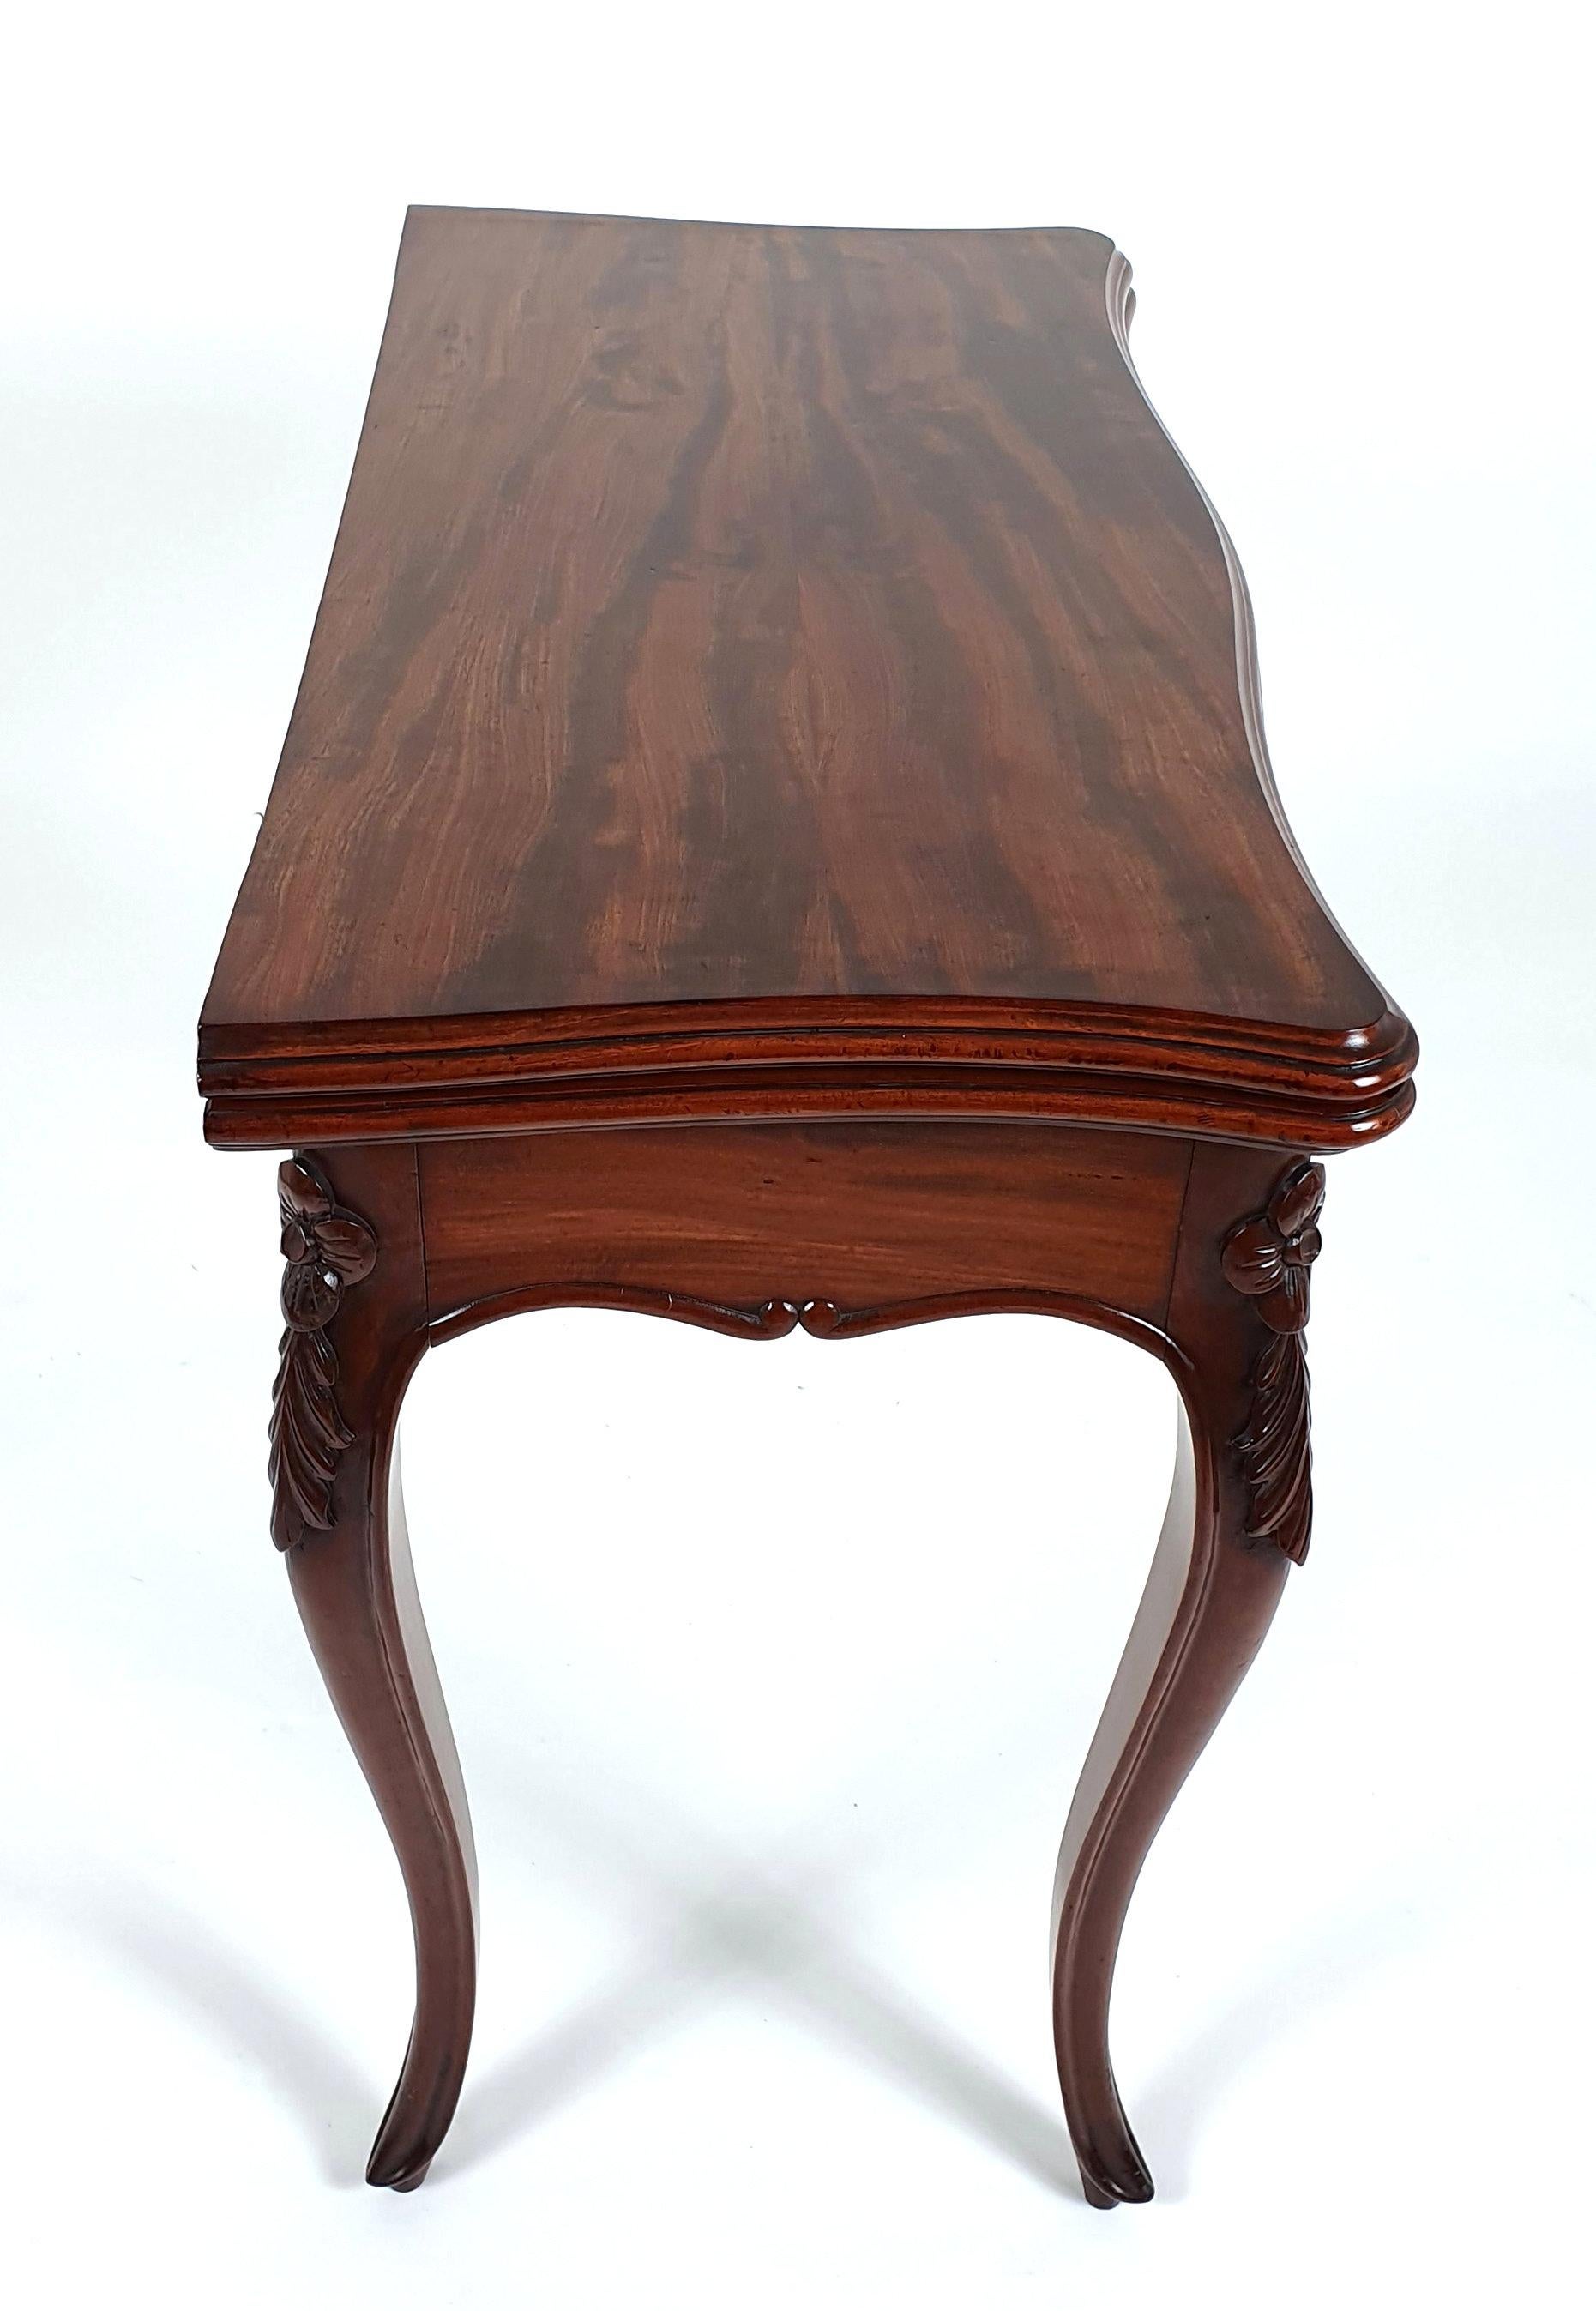 19th Century French Figured Mahogany Fold-Over Card Table For Sale 5